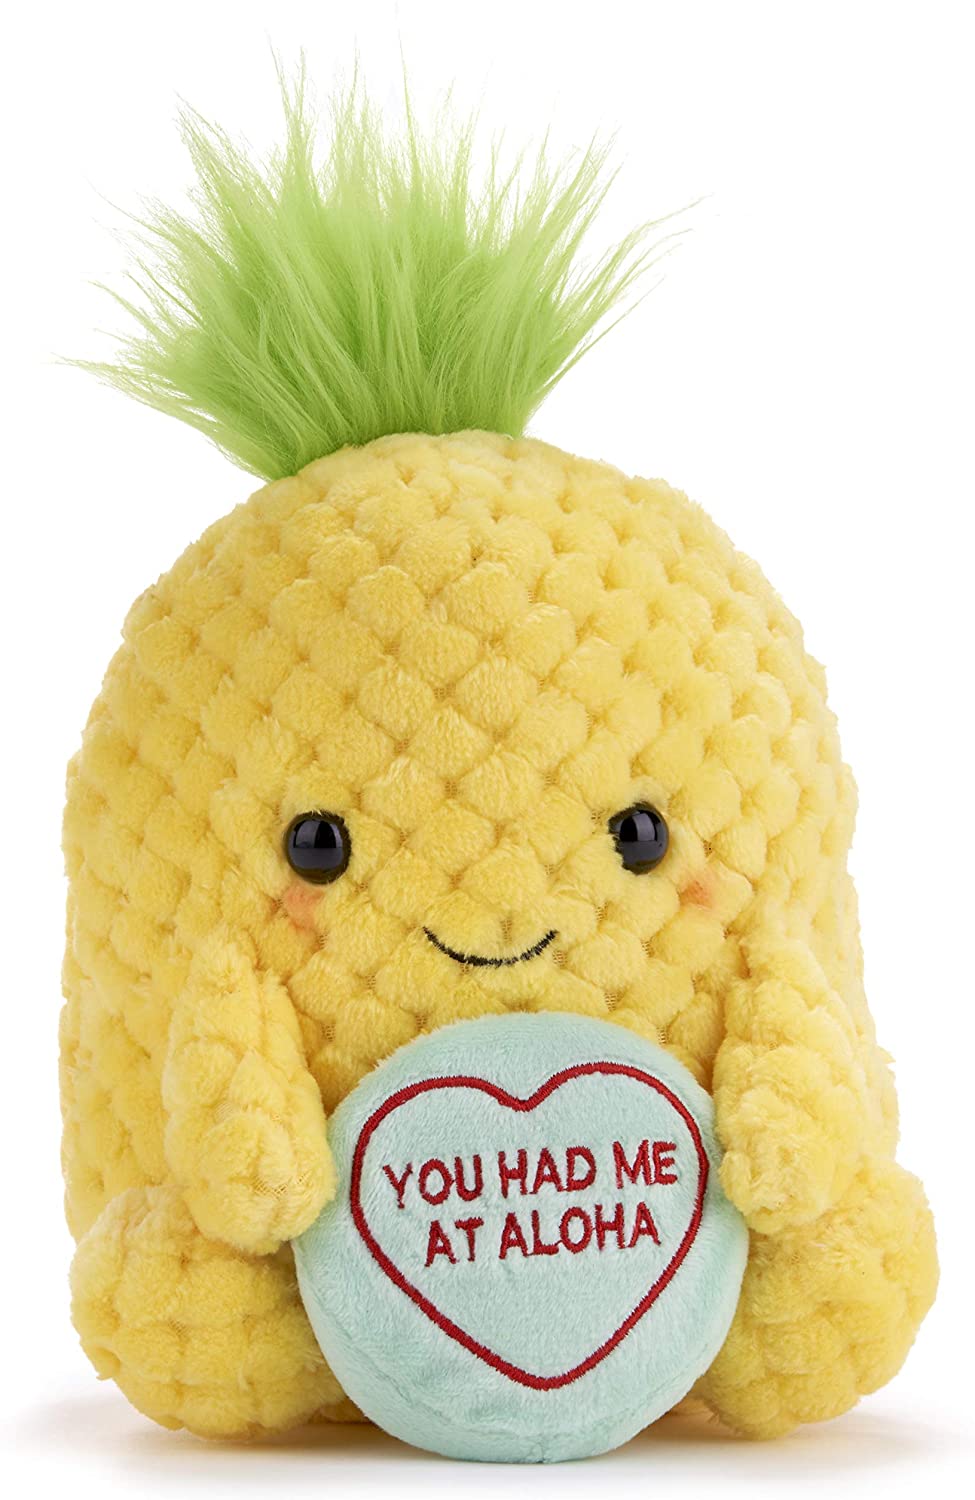 Posh Paws 37520 Swizzwls Love Hearts 18CM (7”) Peter Pineapple Soft Toy